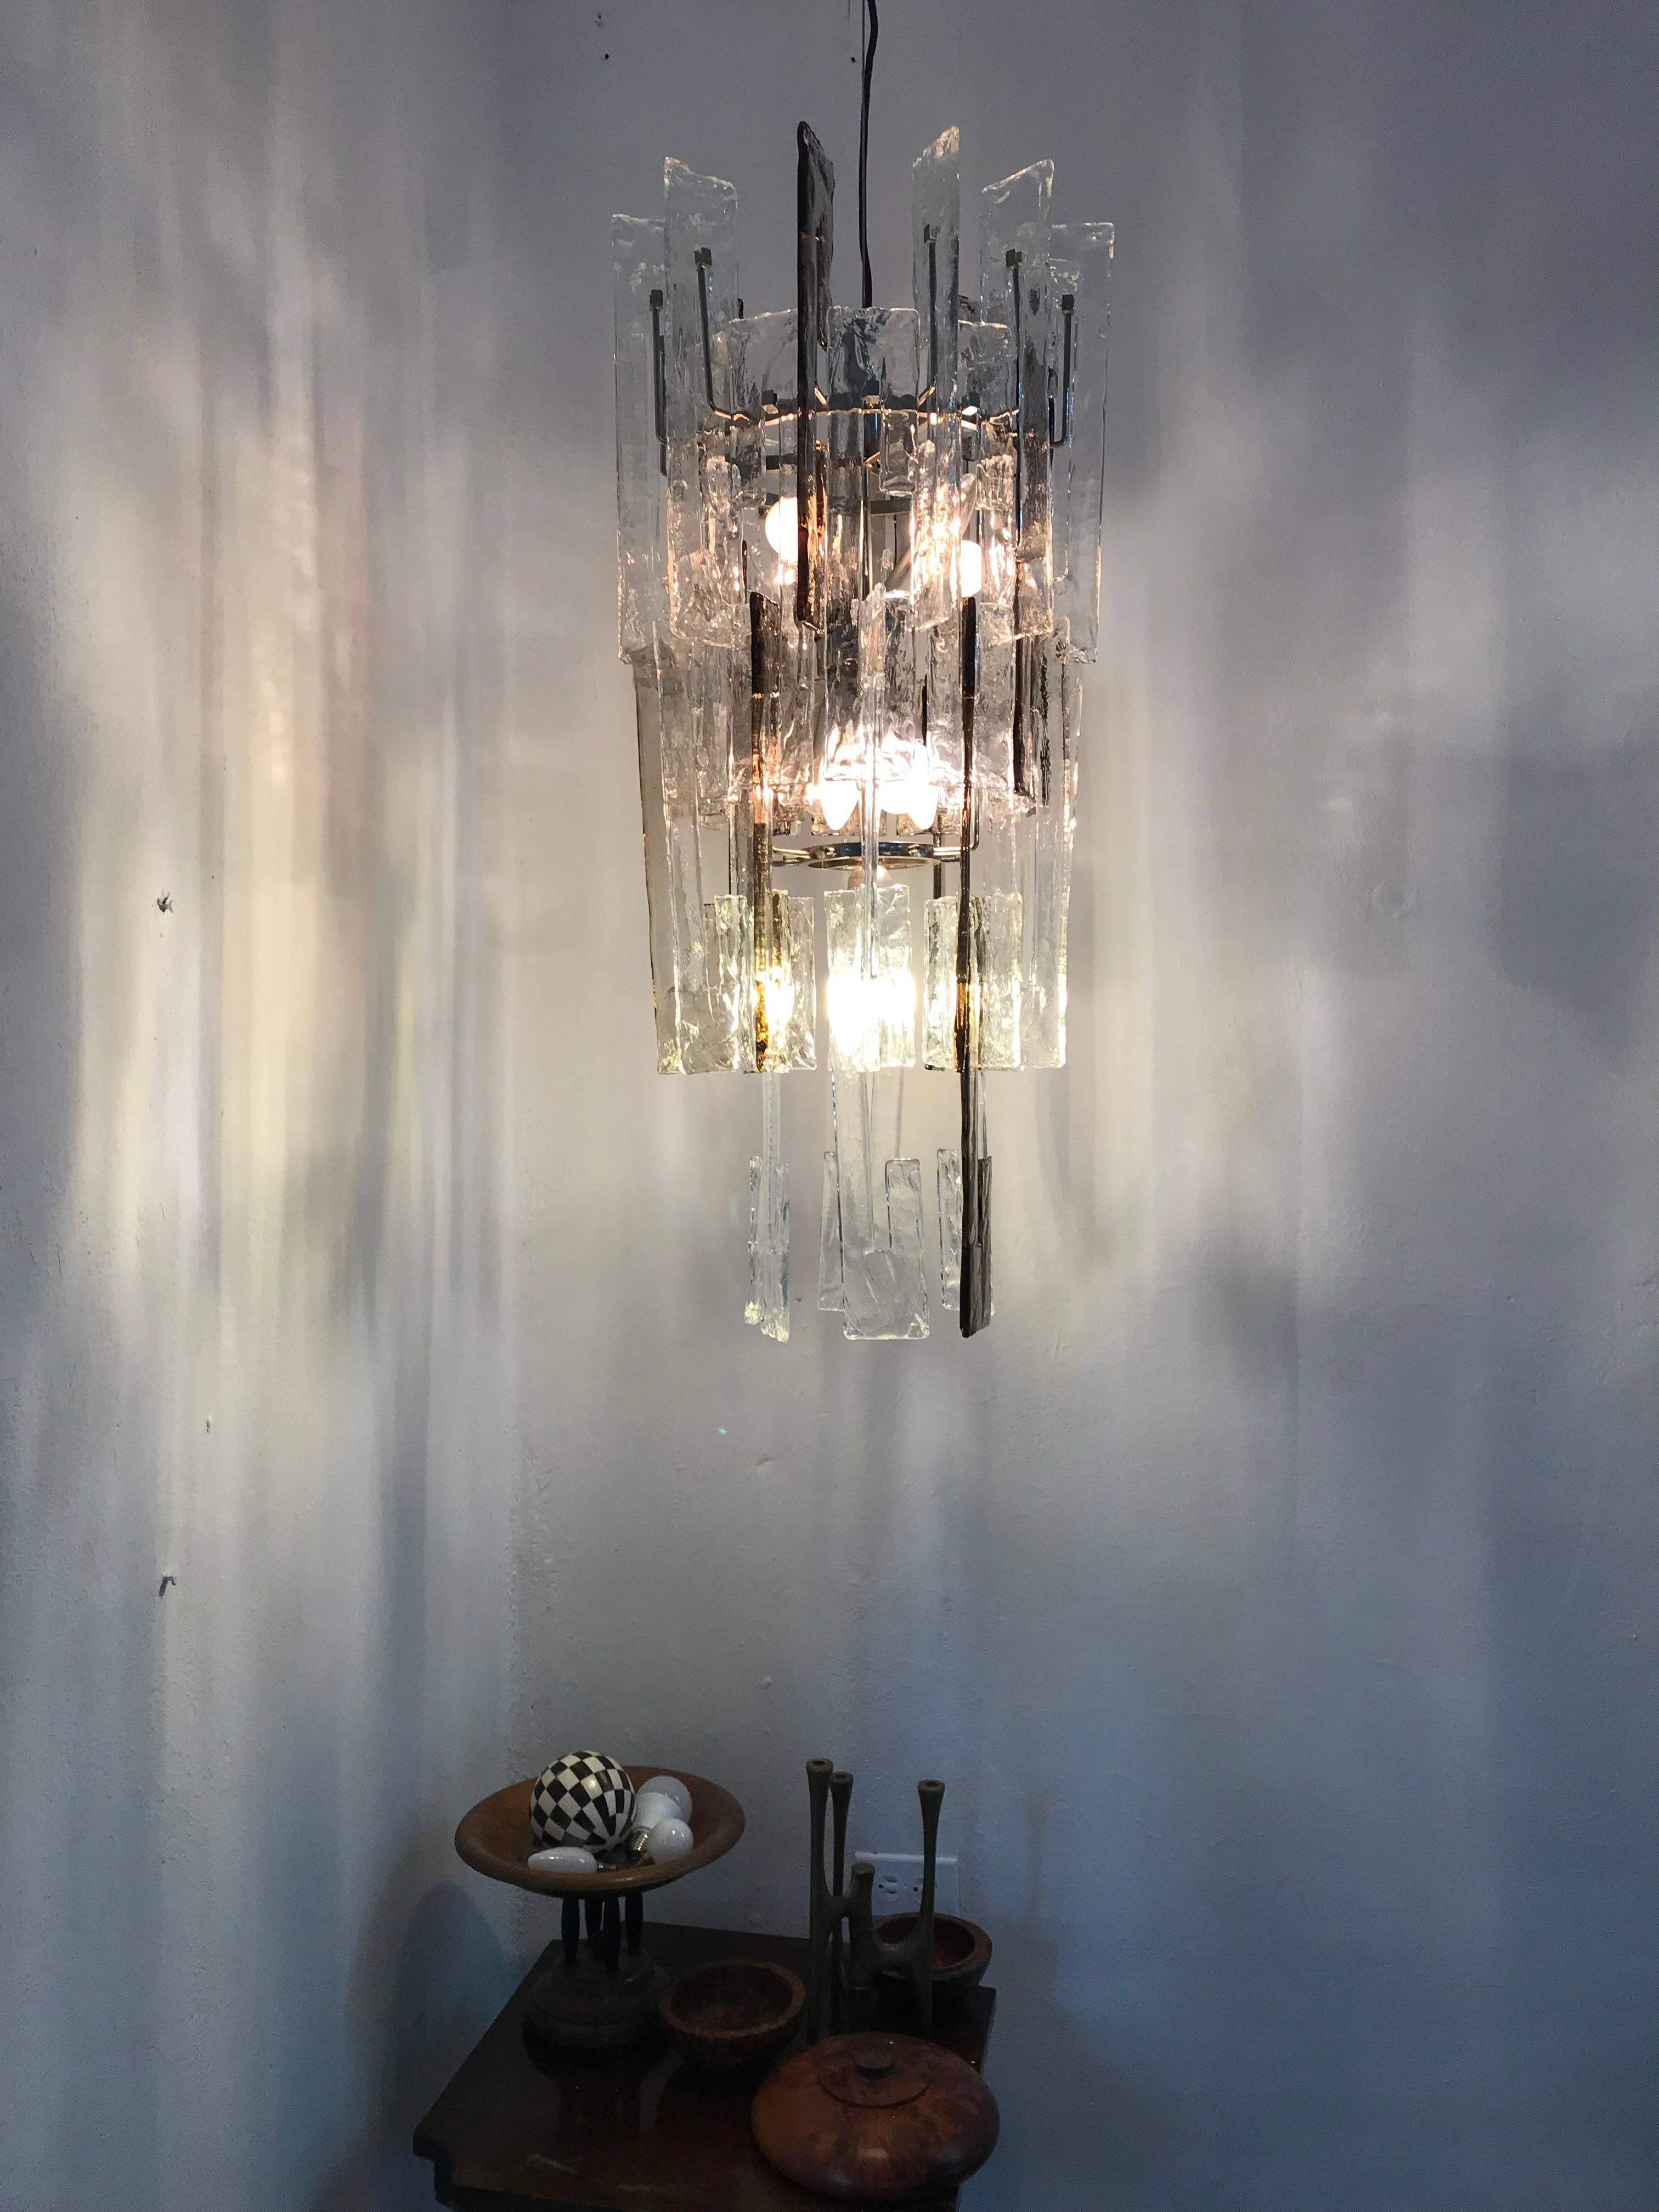 Beautiful Mid-Century Modern chandelier consisting of interlocking C shaped glass links in clear and smoked Murano glass and a Metal structure with 9 lights.
Designed by Carlo Nason and produced by Mazzega, circa 1960.